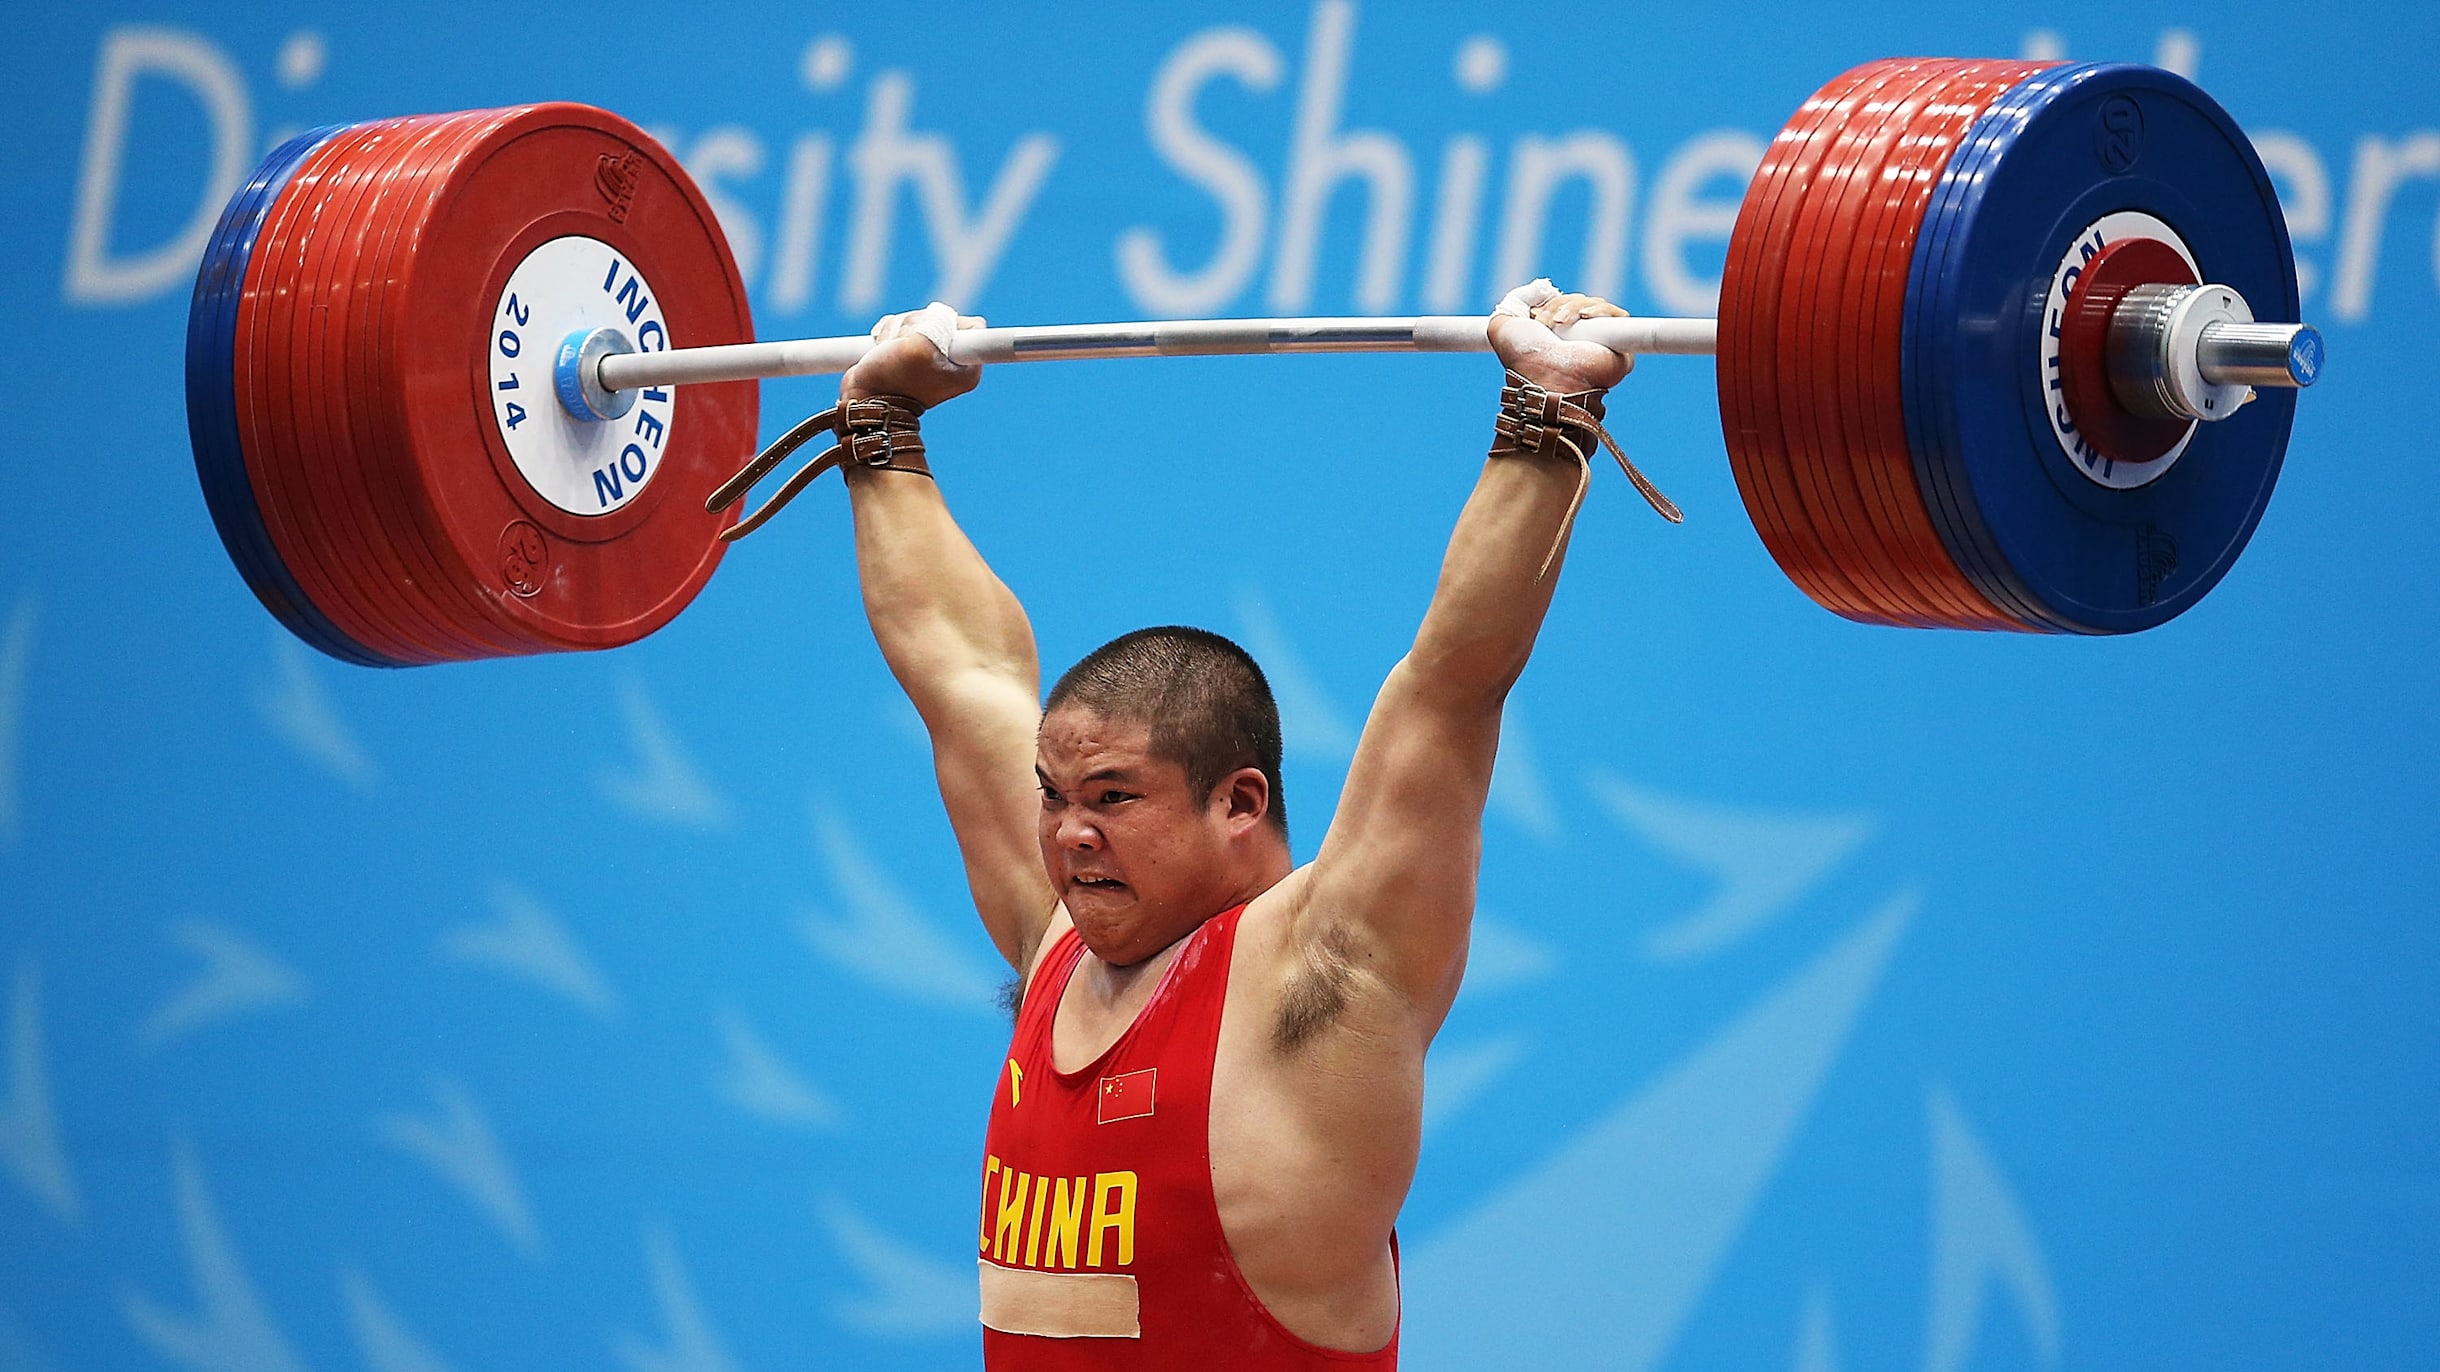 The Beginner's Guide to Olympic Lifting - How to Do Olympic Lifts